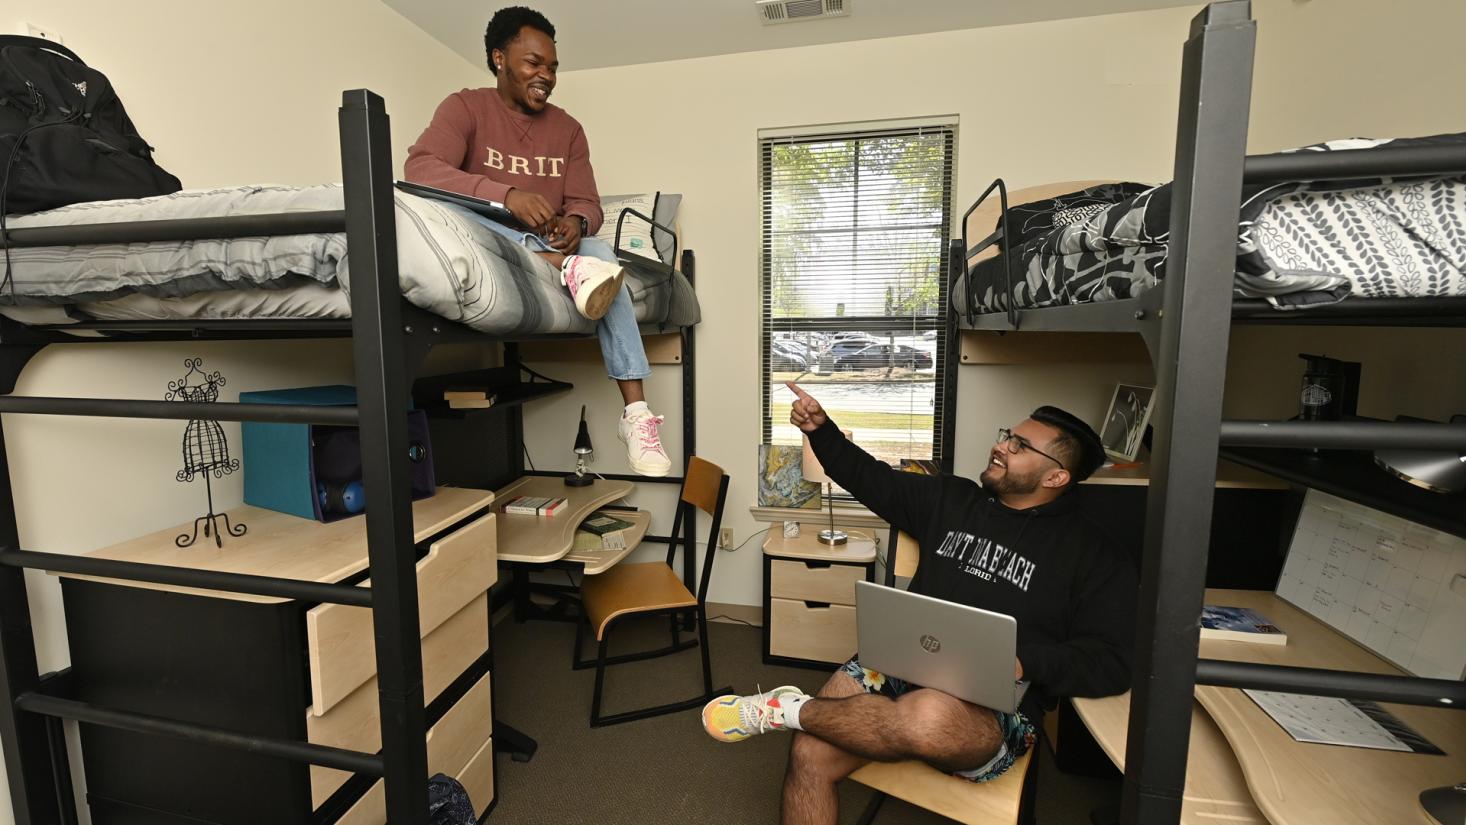 Two male students in a GGC dorm room with bunk beds